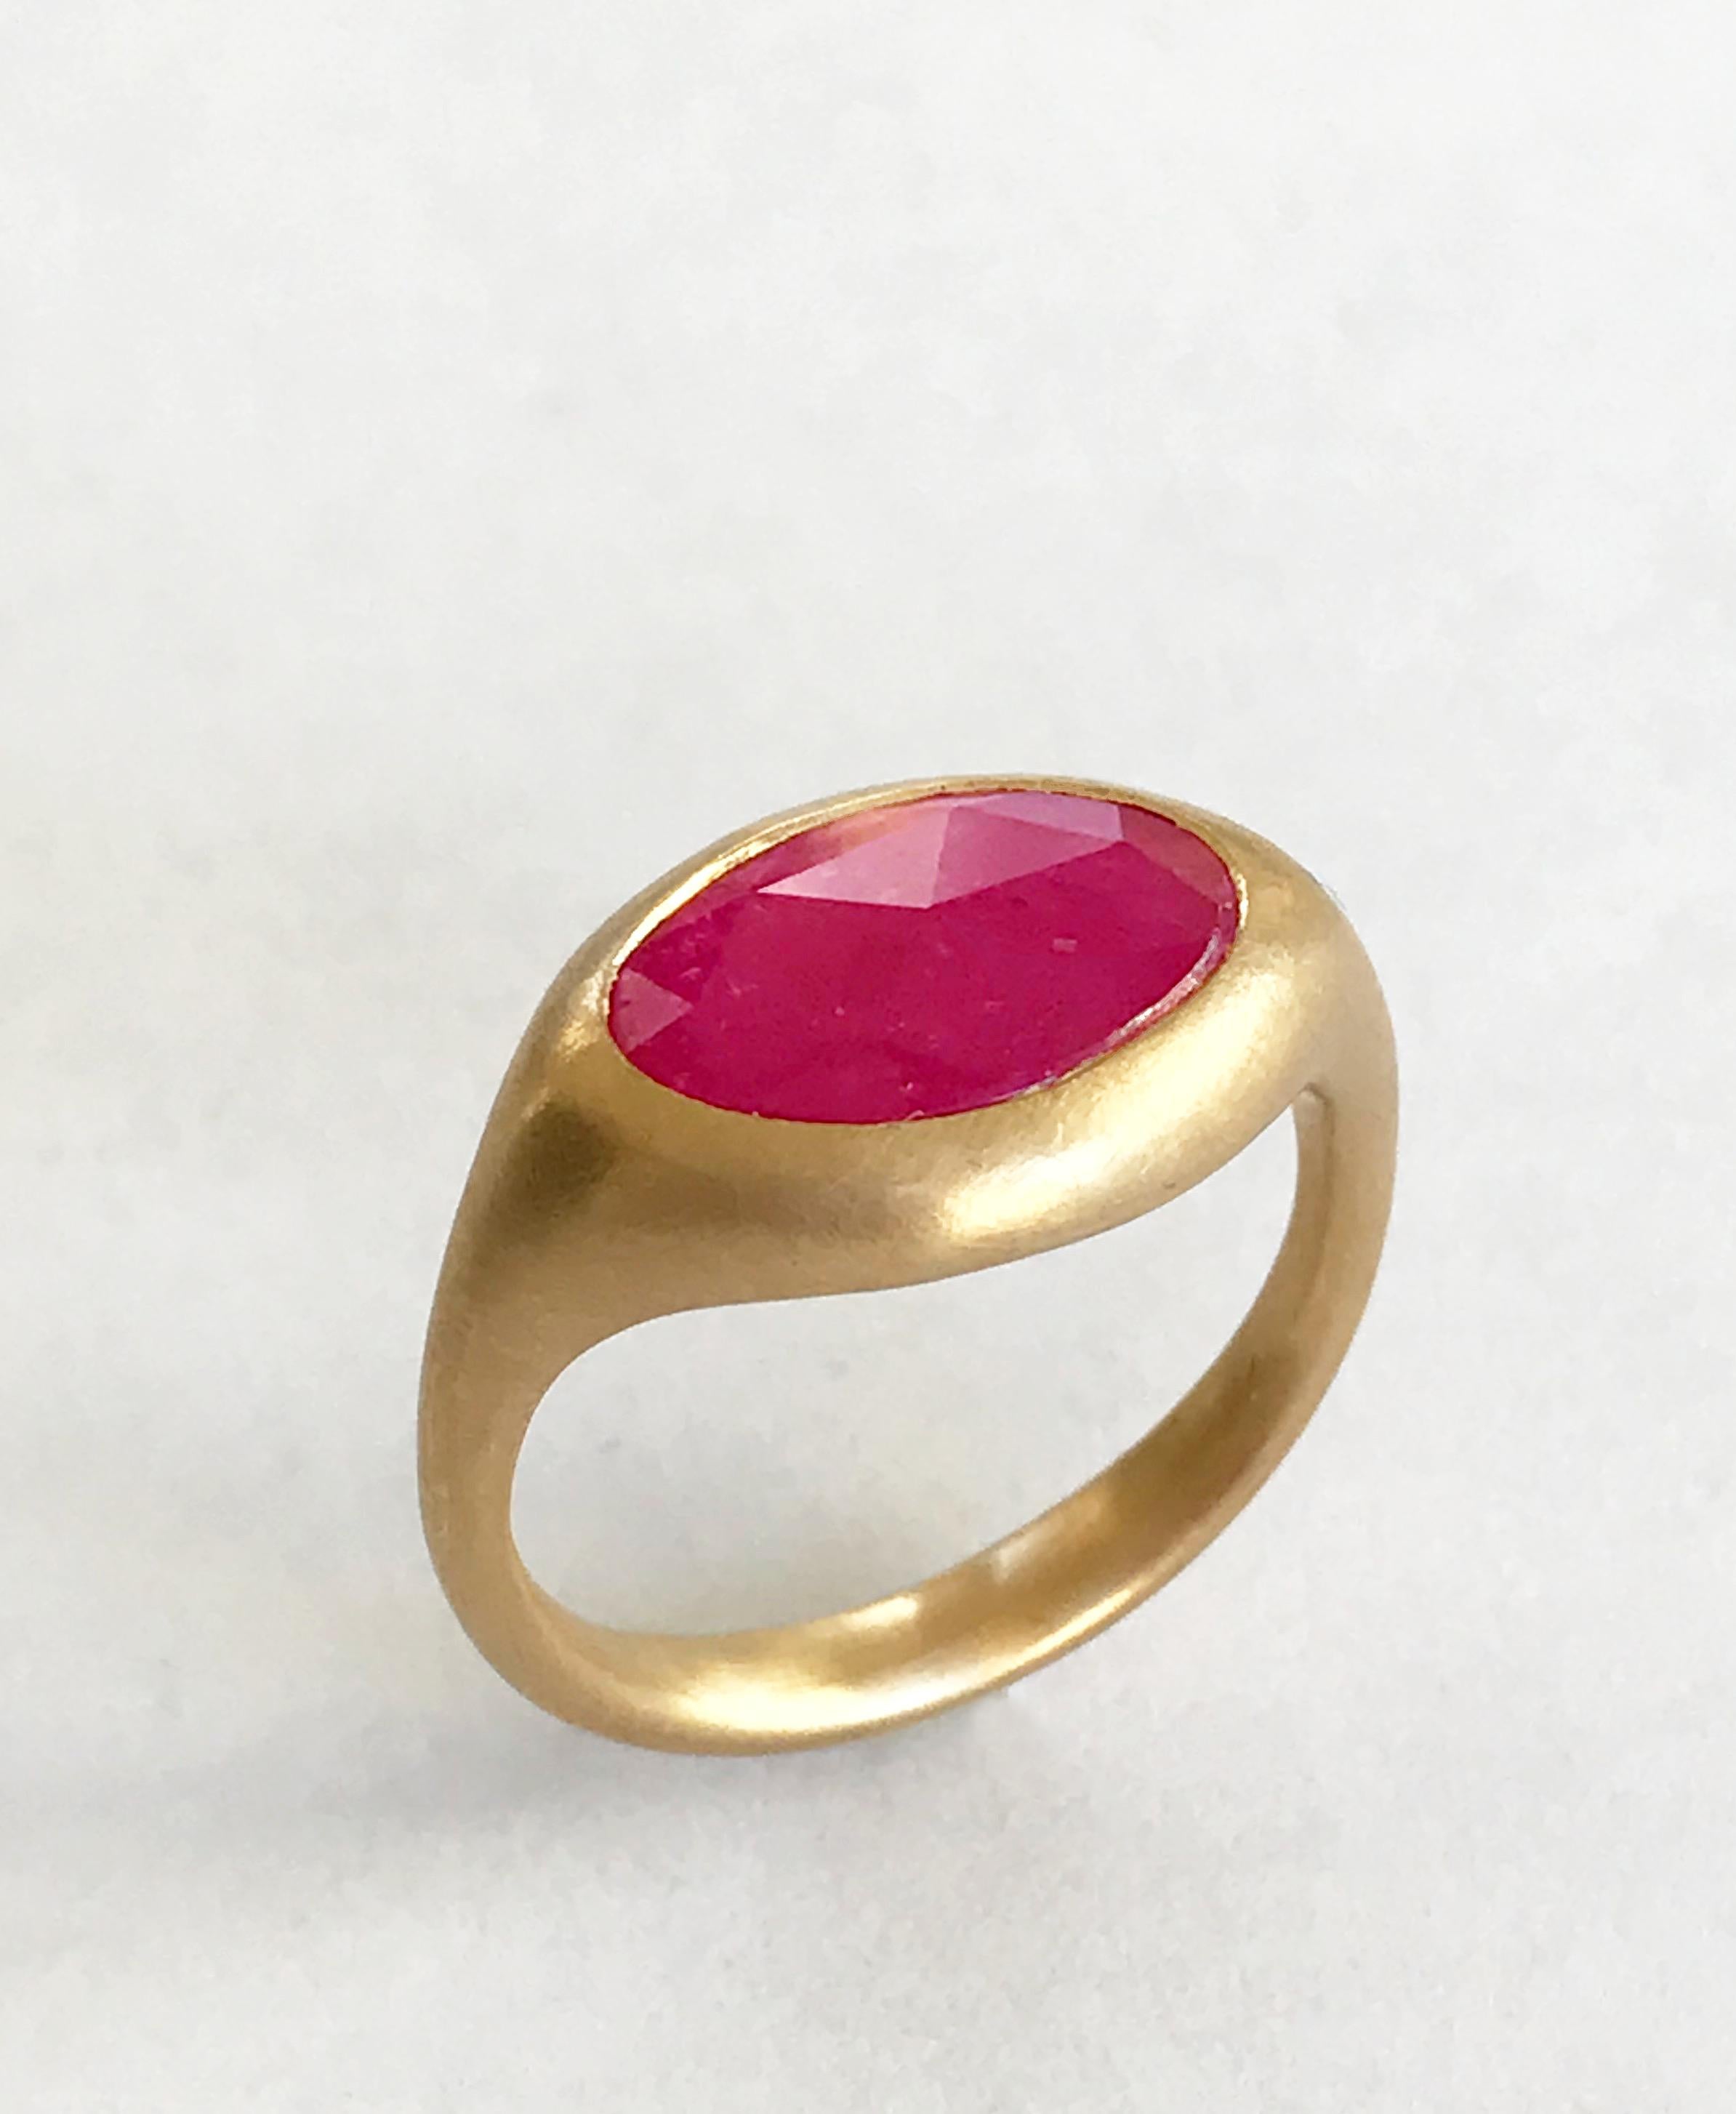 Dalben design One of a Kind 18k yellow gold matte finishing ring with a 1,78 carat bezel-set oval  rose cut slice ruby. 
Ring size 6 1/4 USA - EU 52 re-sizable to most finger sizes. 
Bezel stone dimensions :
height 10,7 mm
width 16,5 mm
The ring has